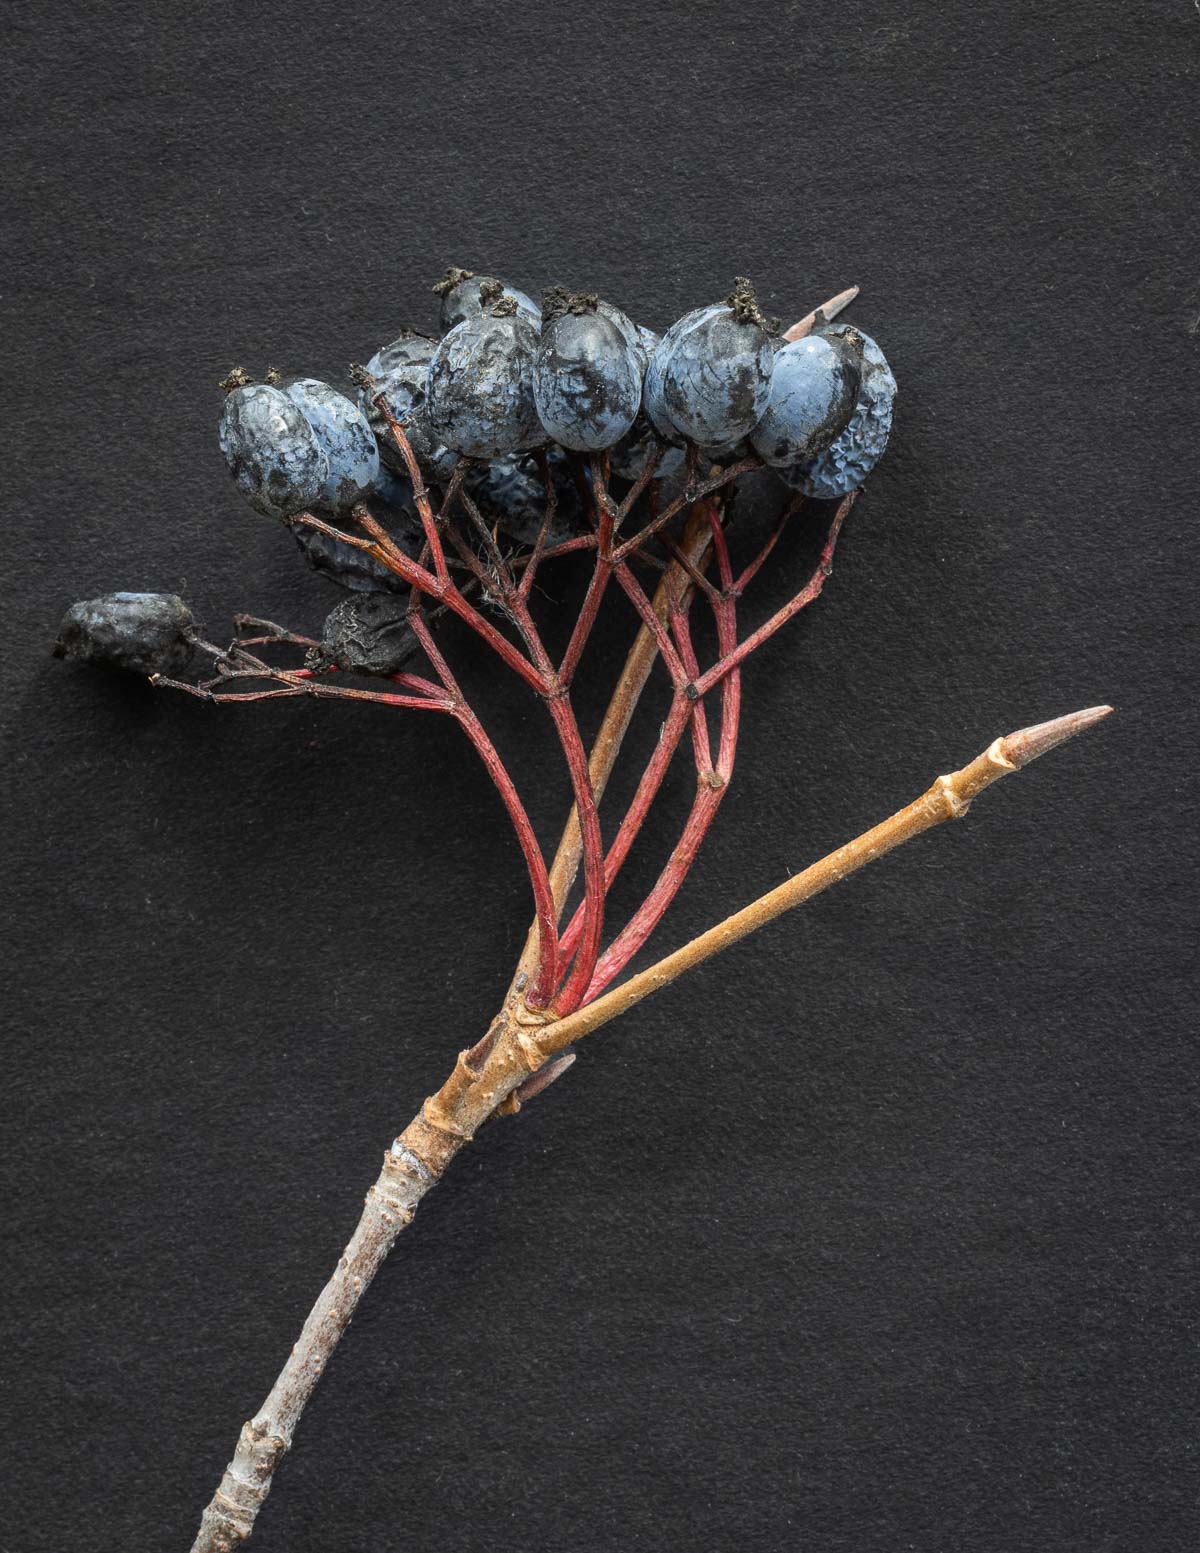 A close up identification image of ripe viburnum fruit on the branch showing the claw-shaped nannyberry bud and red stems.